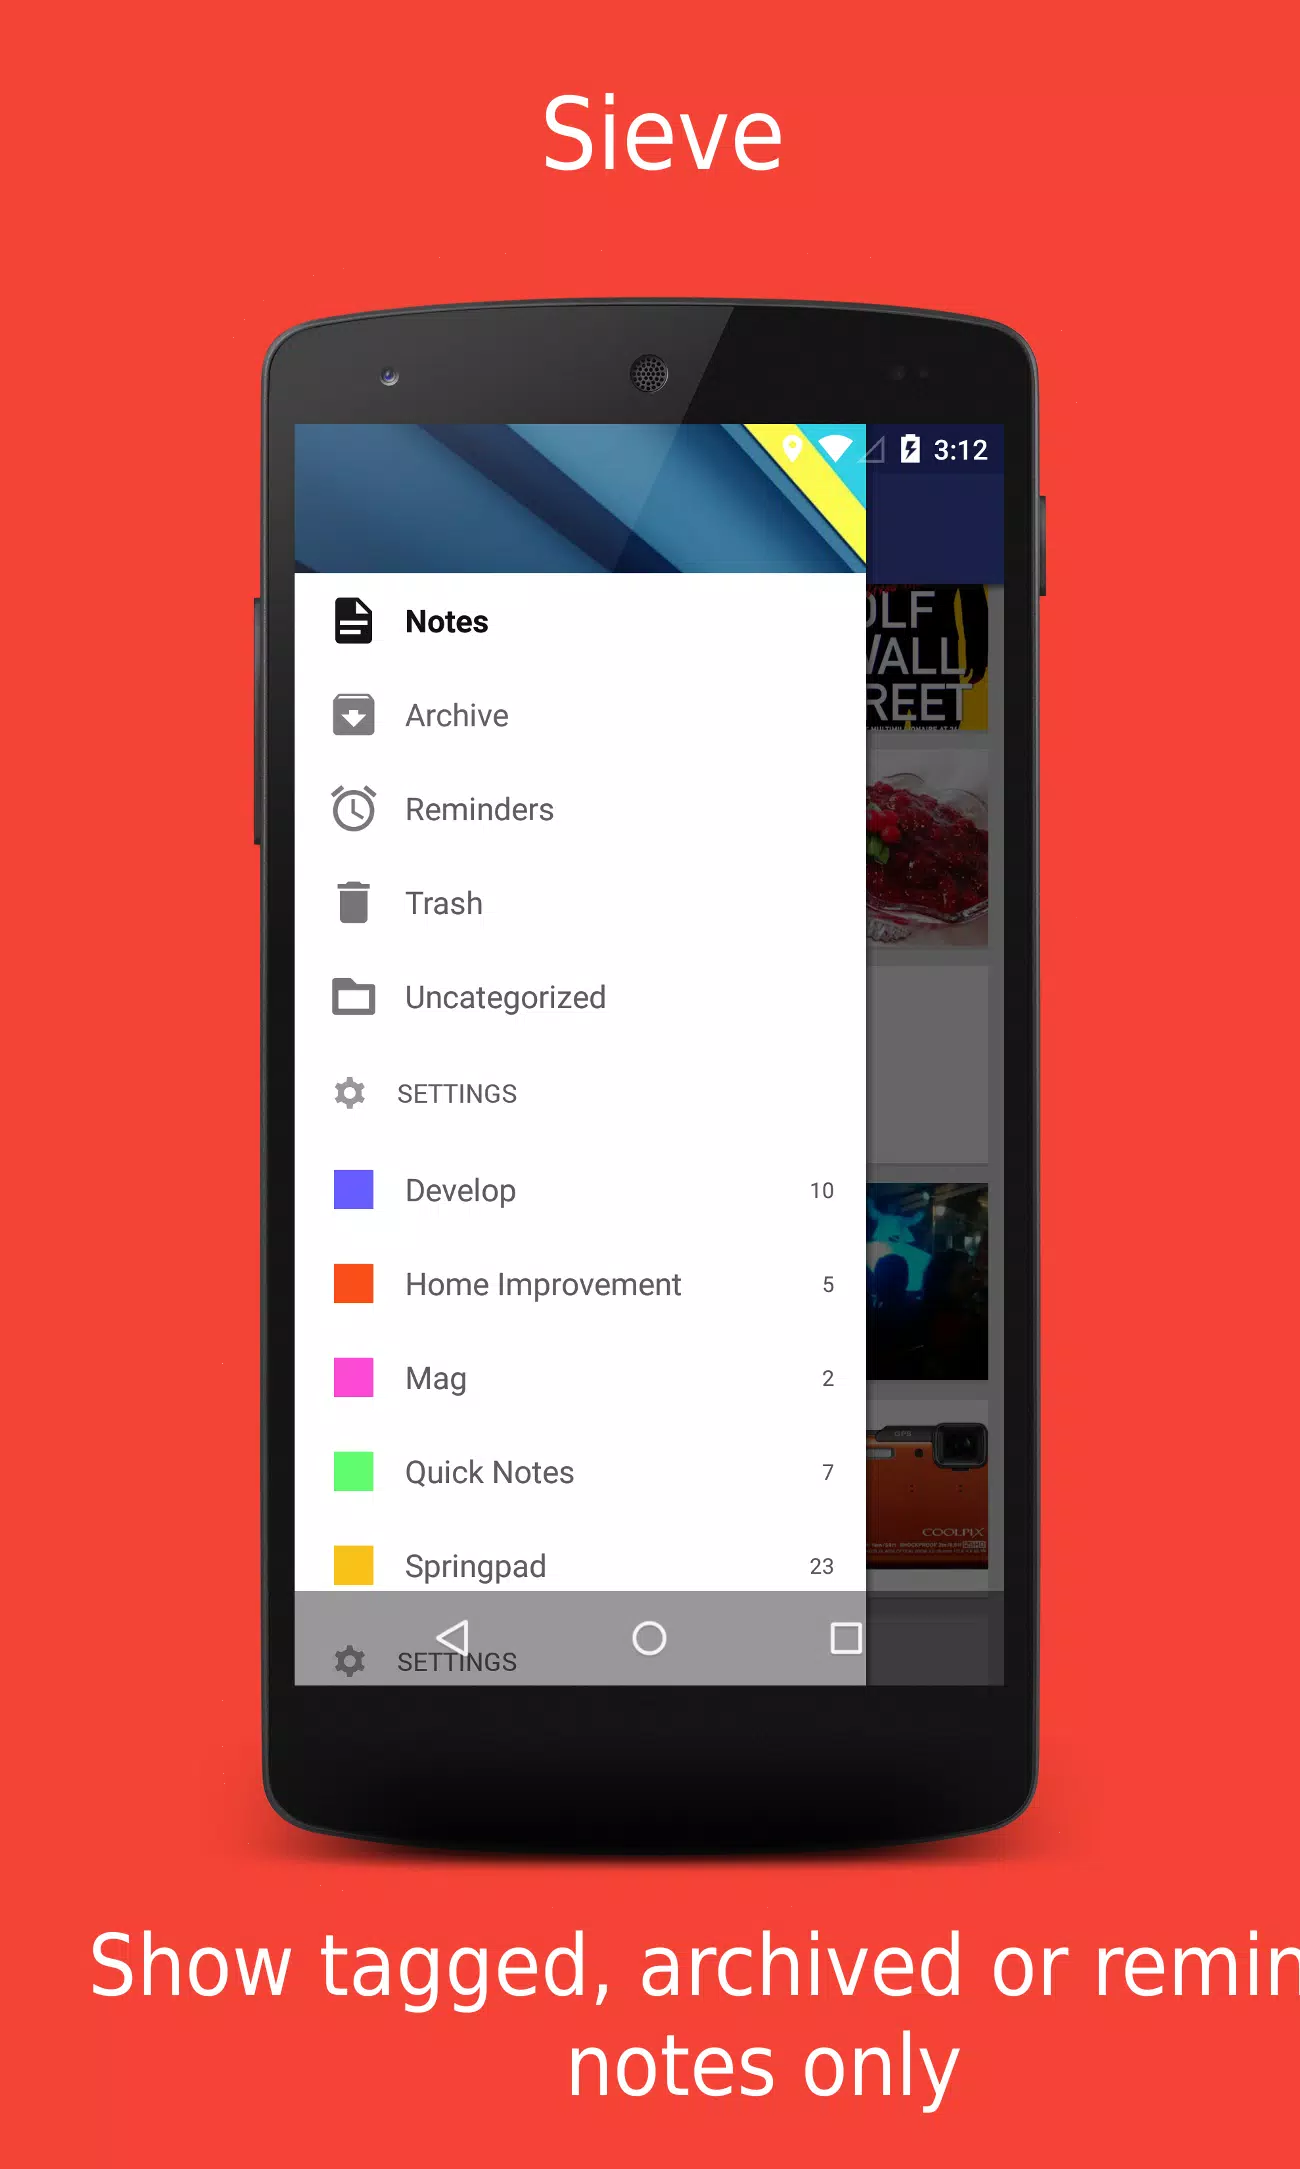 Download Notebook - Notes, Journal APKs for Android - APKMirror